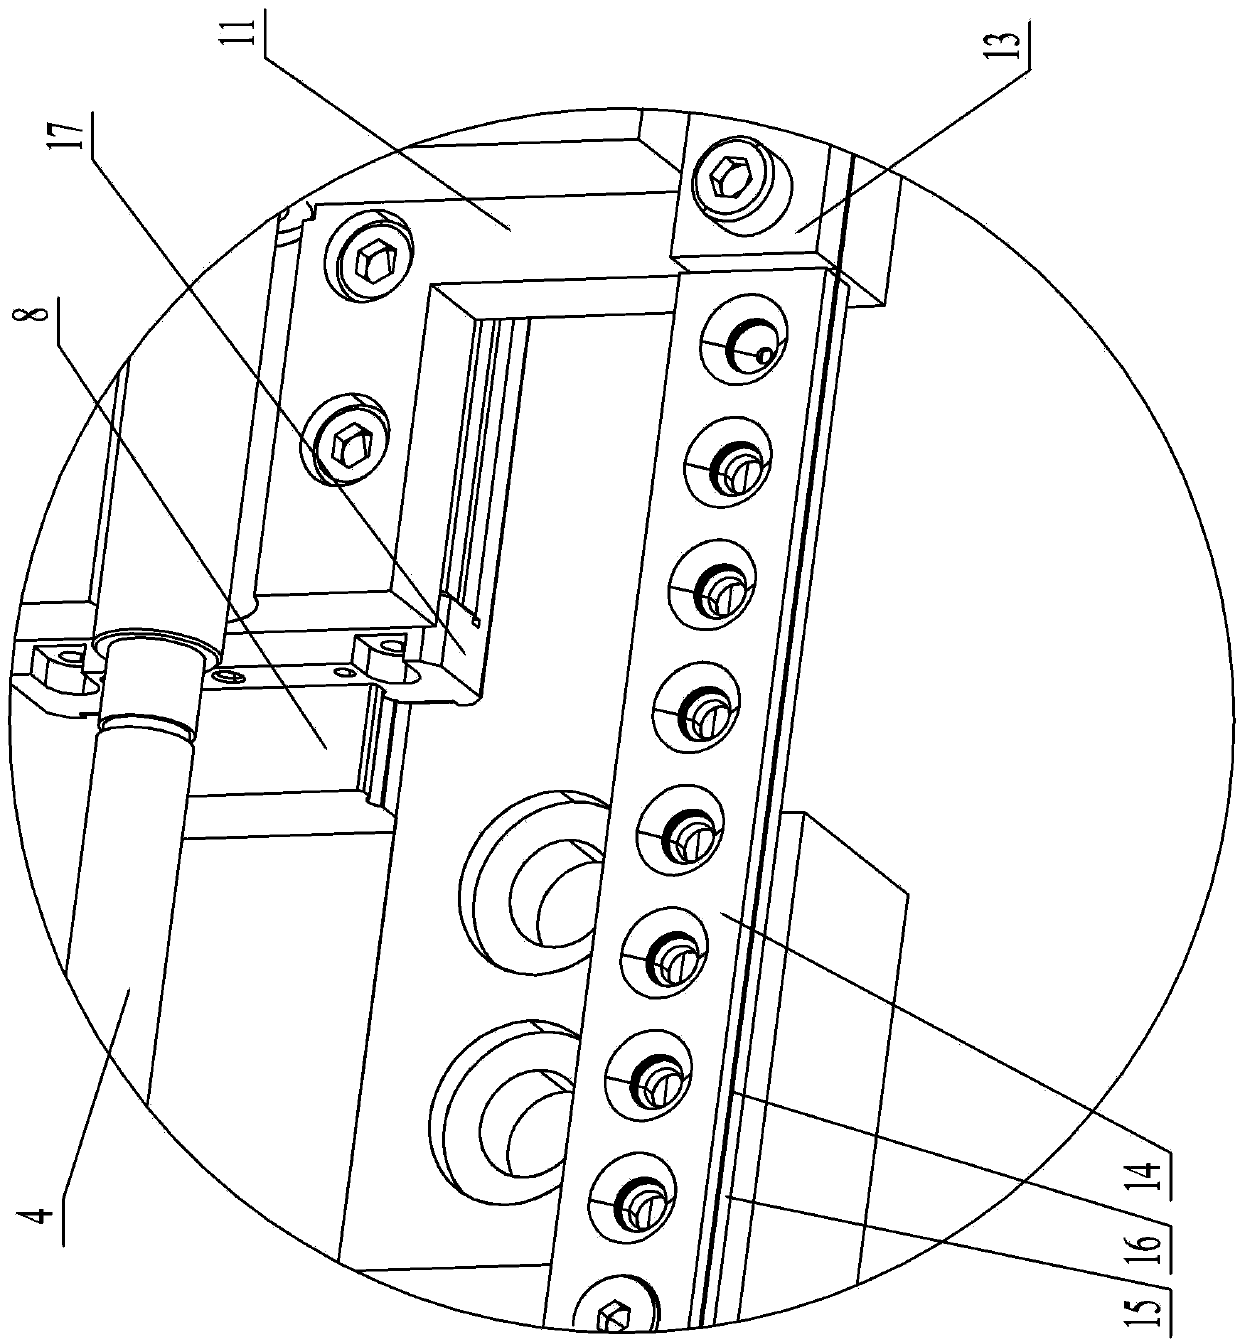 Rotary-motion-oriented reed type linear micro-driving mechanism